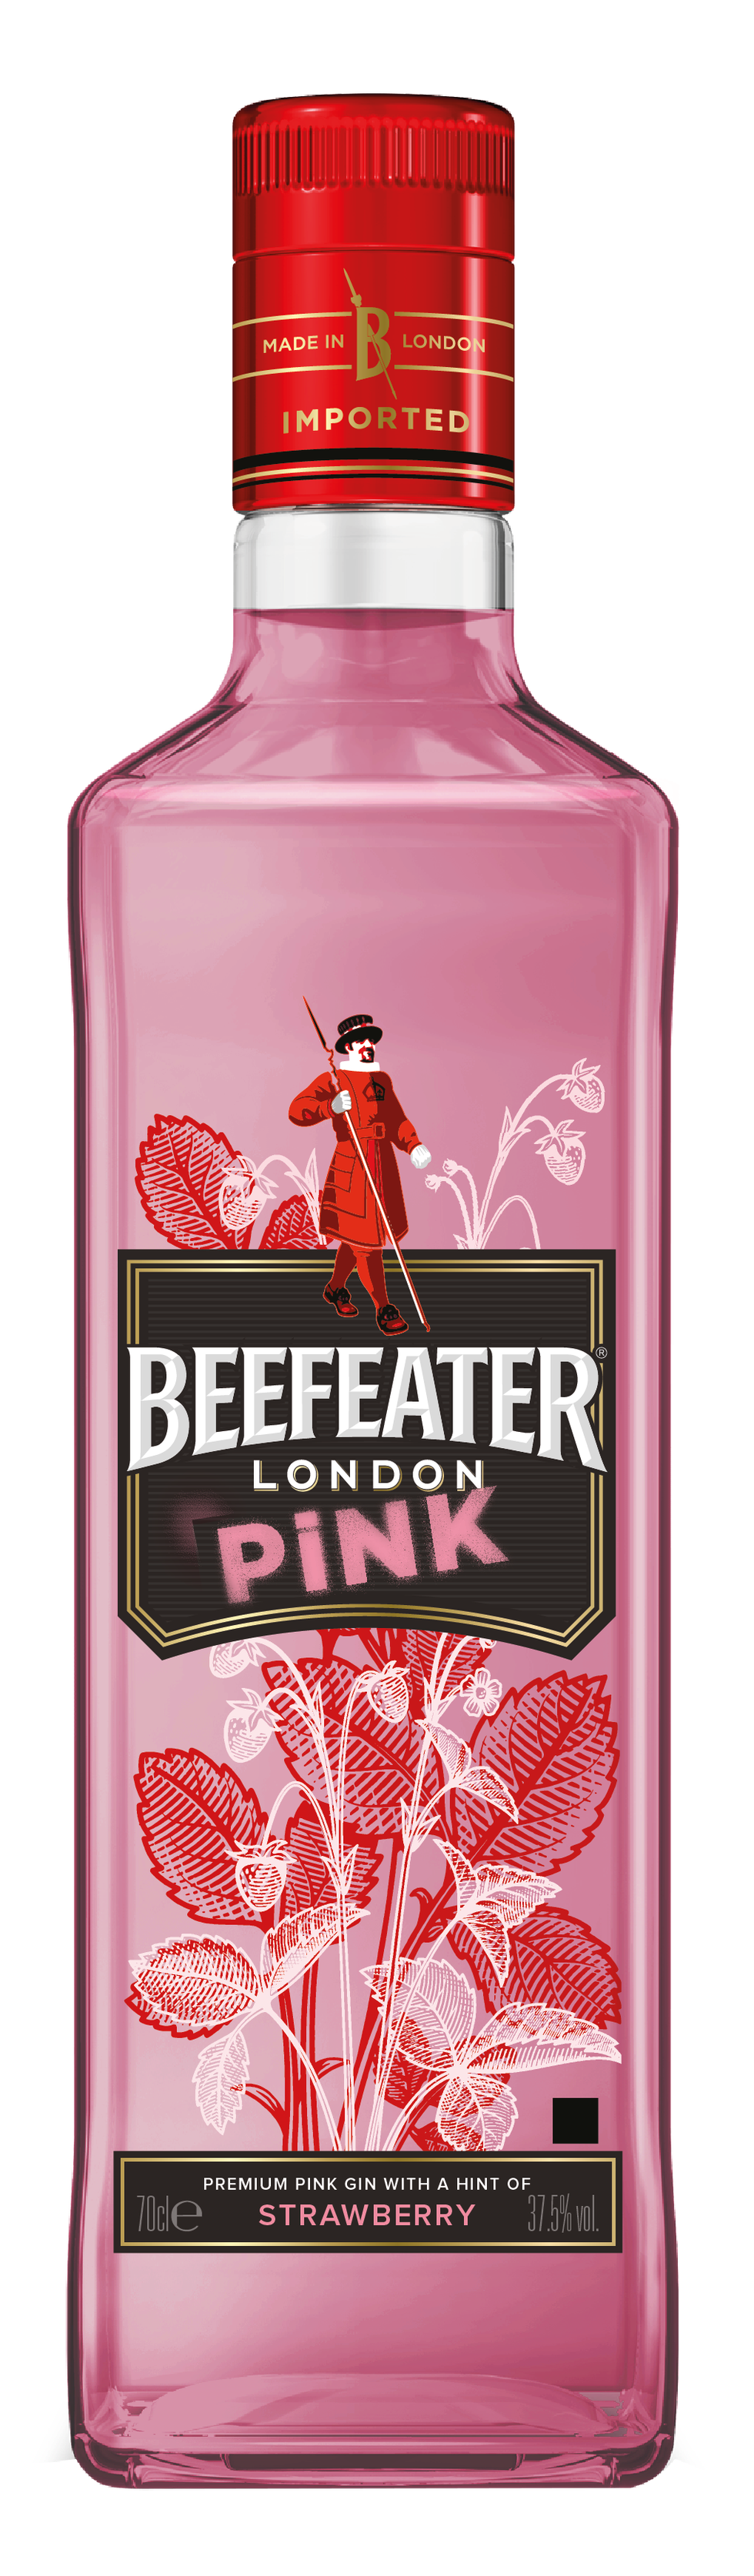 Beefeater pink gin